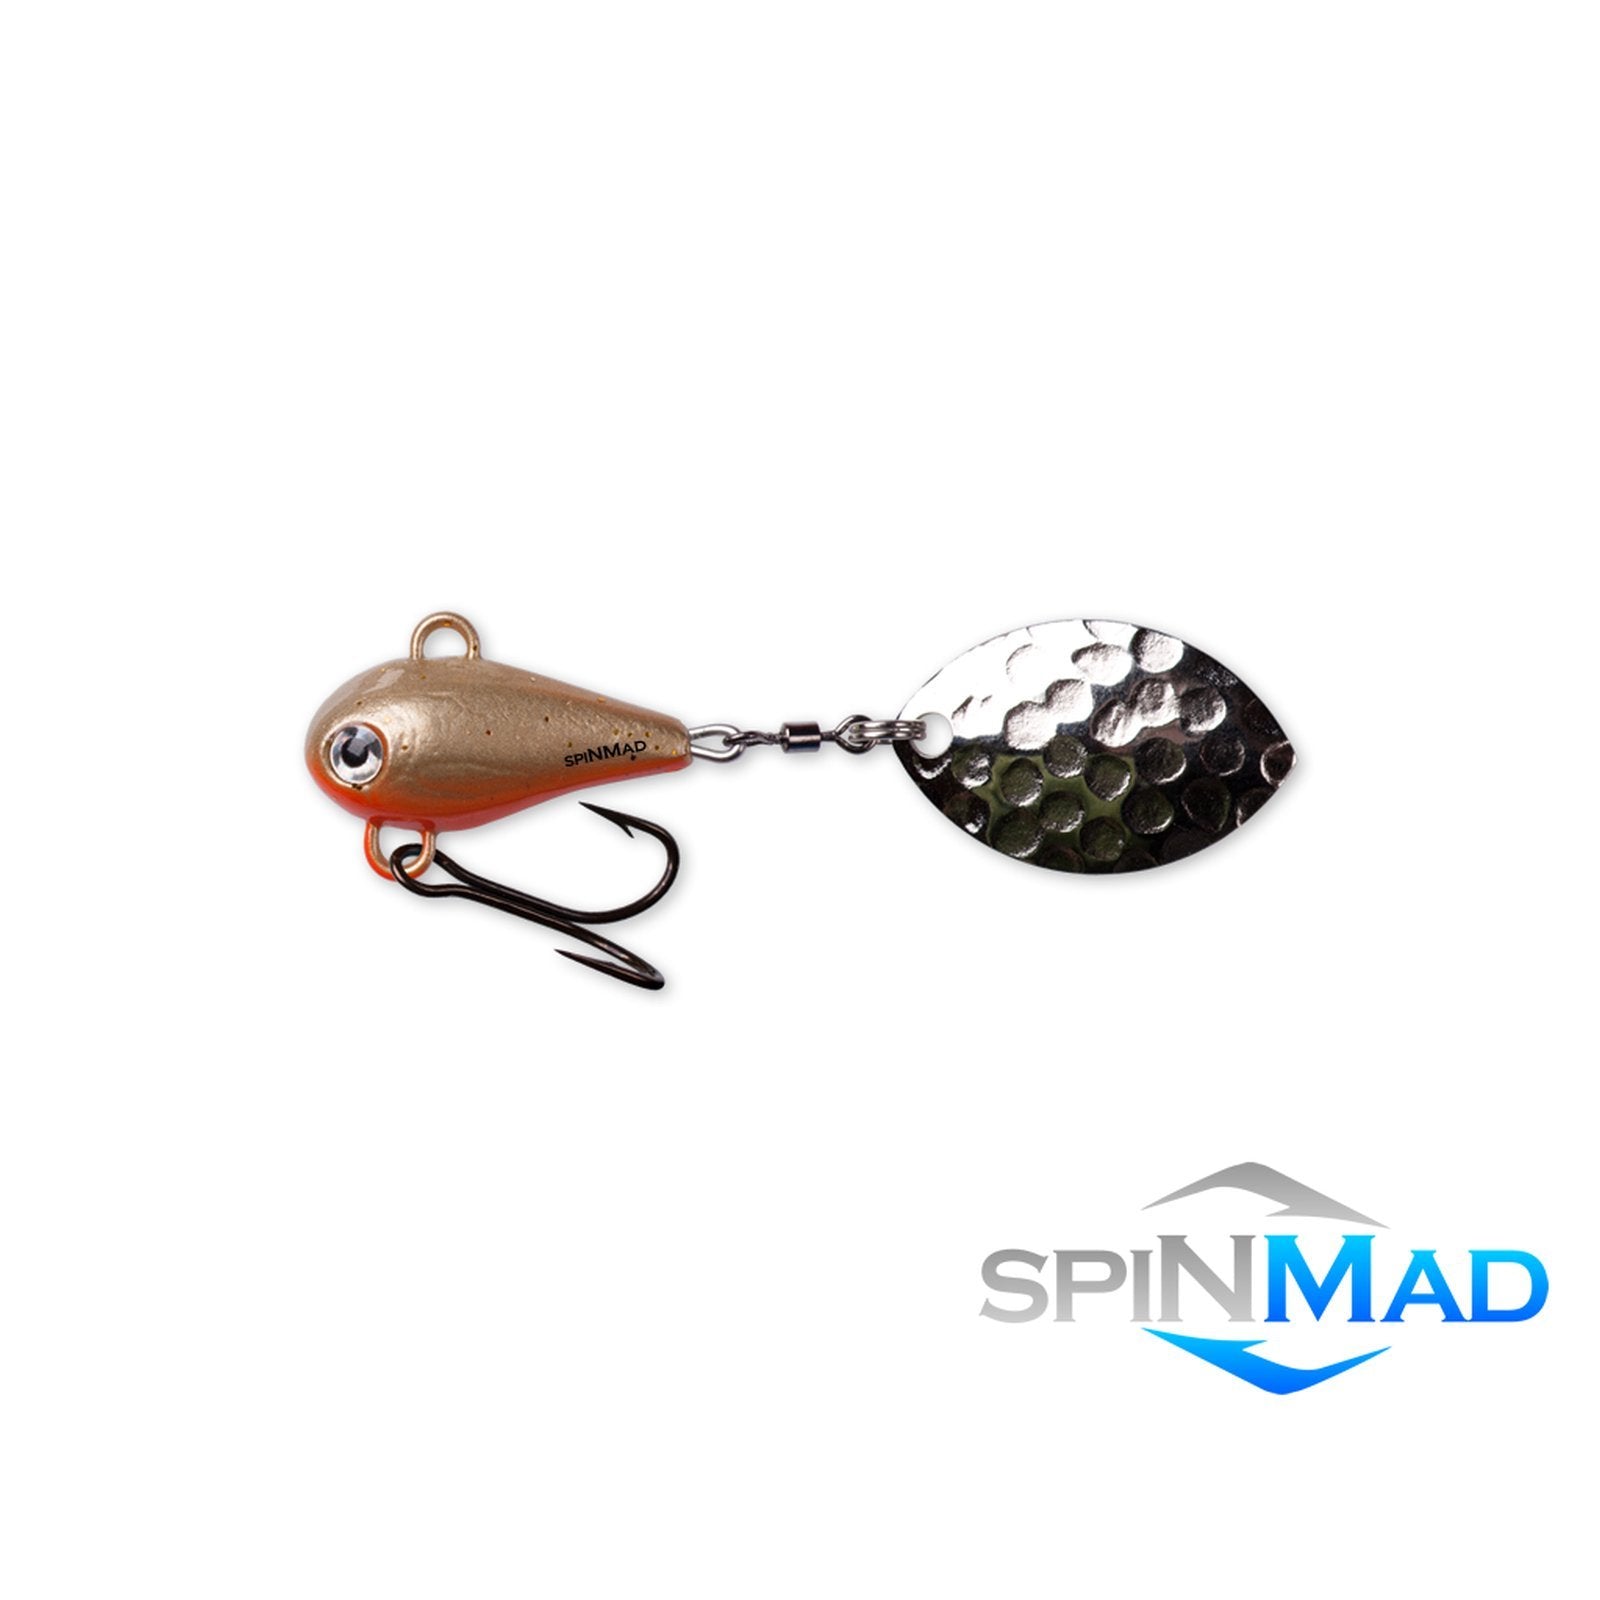 SpinMad MAG 6 0704